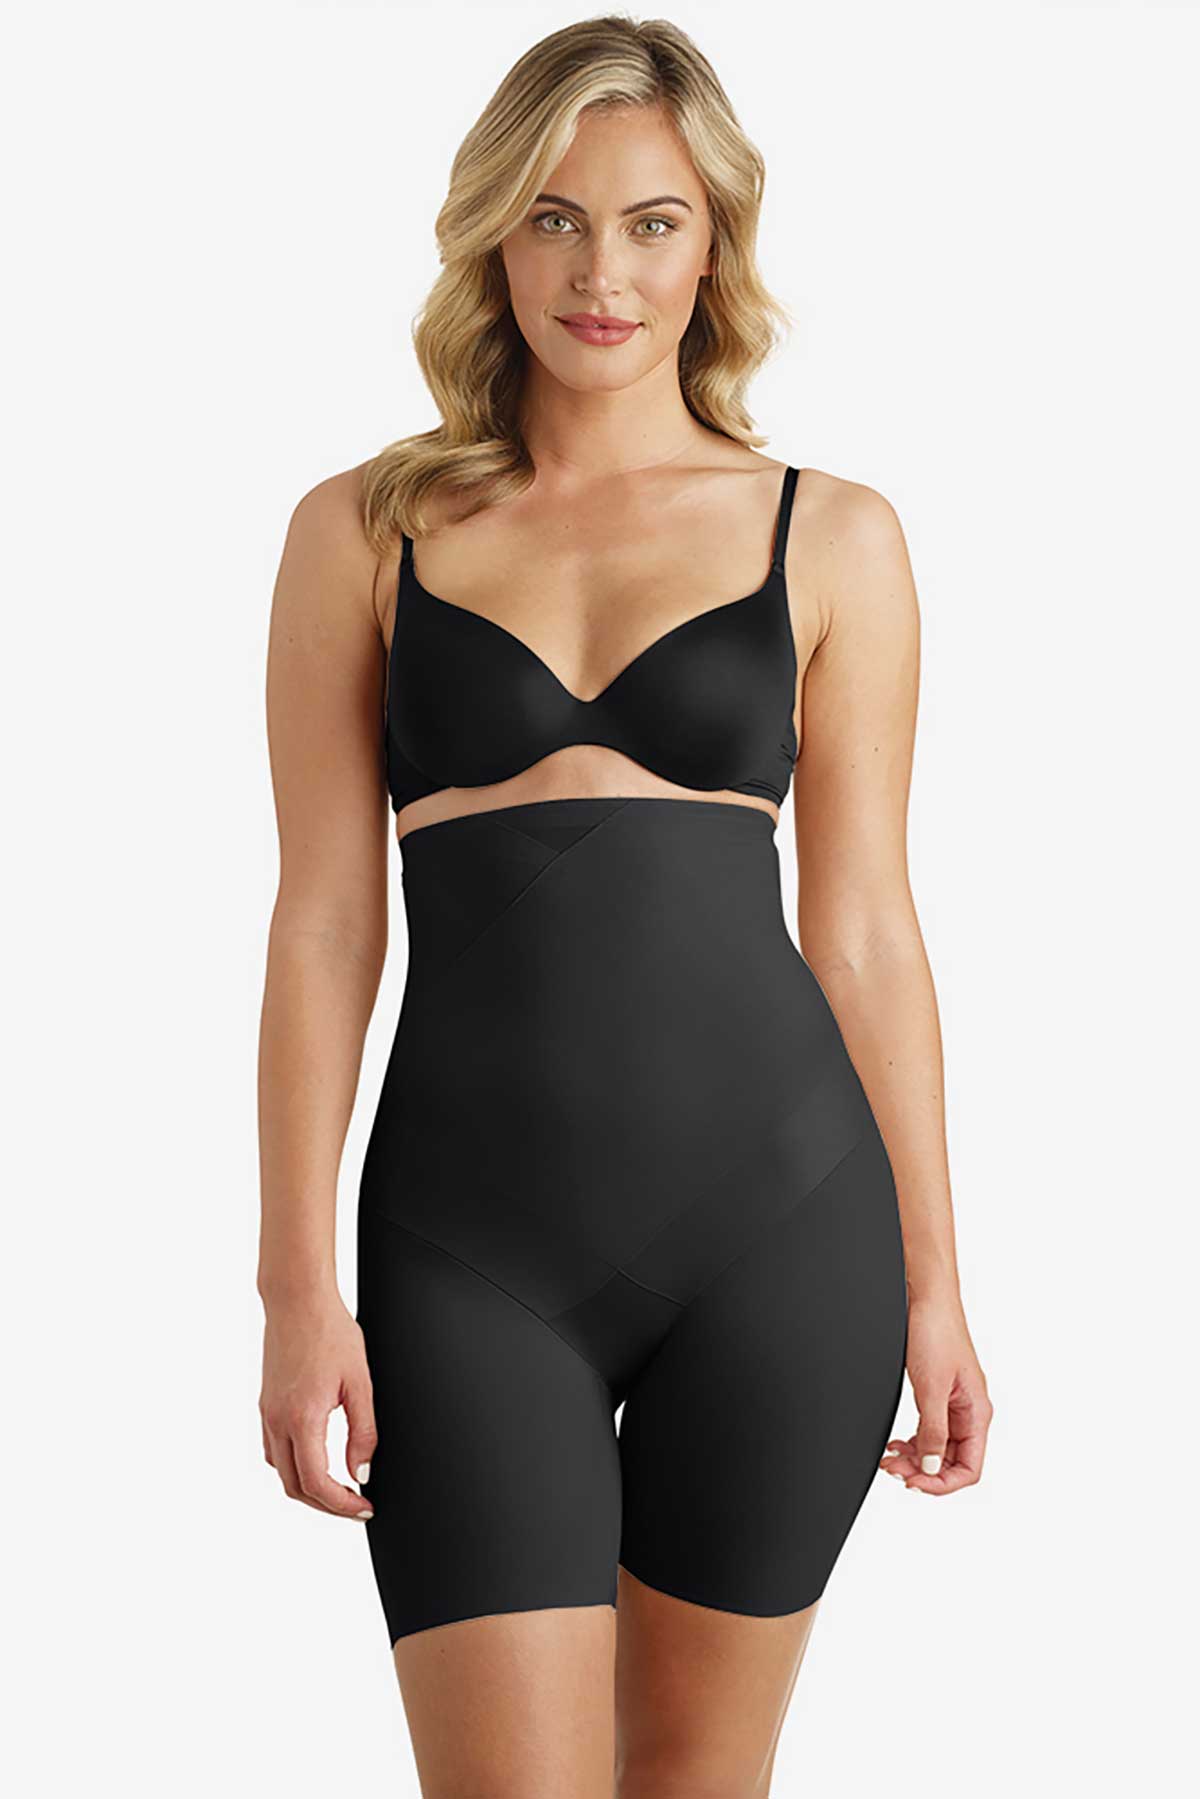 Miraclesuit Back Magic Extra Firm Torsette Thigh Slimmer Black 3X (Women's  22) at  Women's Clothing store